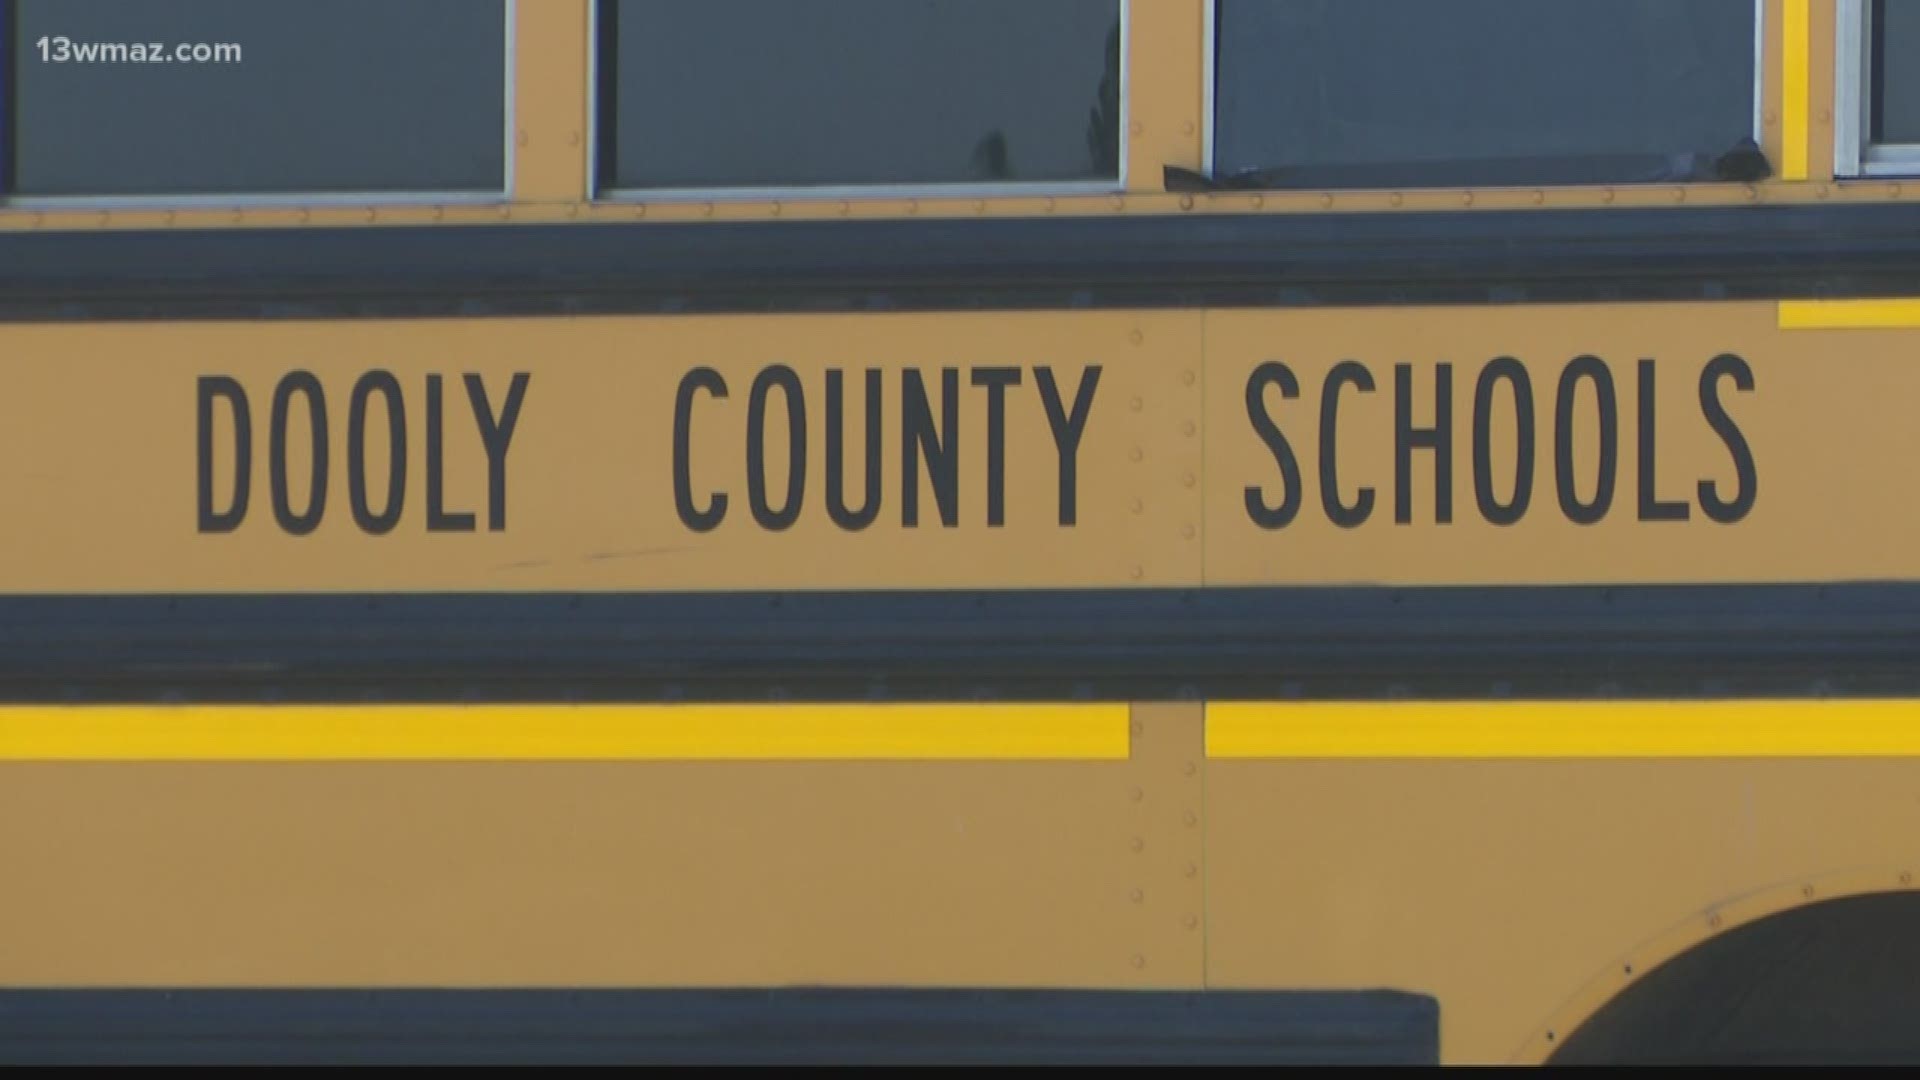 A school bus ride in Dooly County turned violent this week as a bus monitor and a student fought. Now, the sheriff's office is investigating, trying to figure out exactly how it all unfolded.